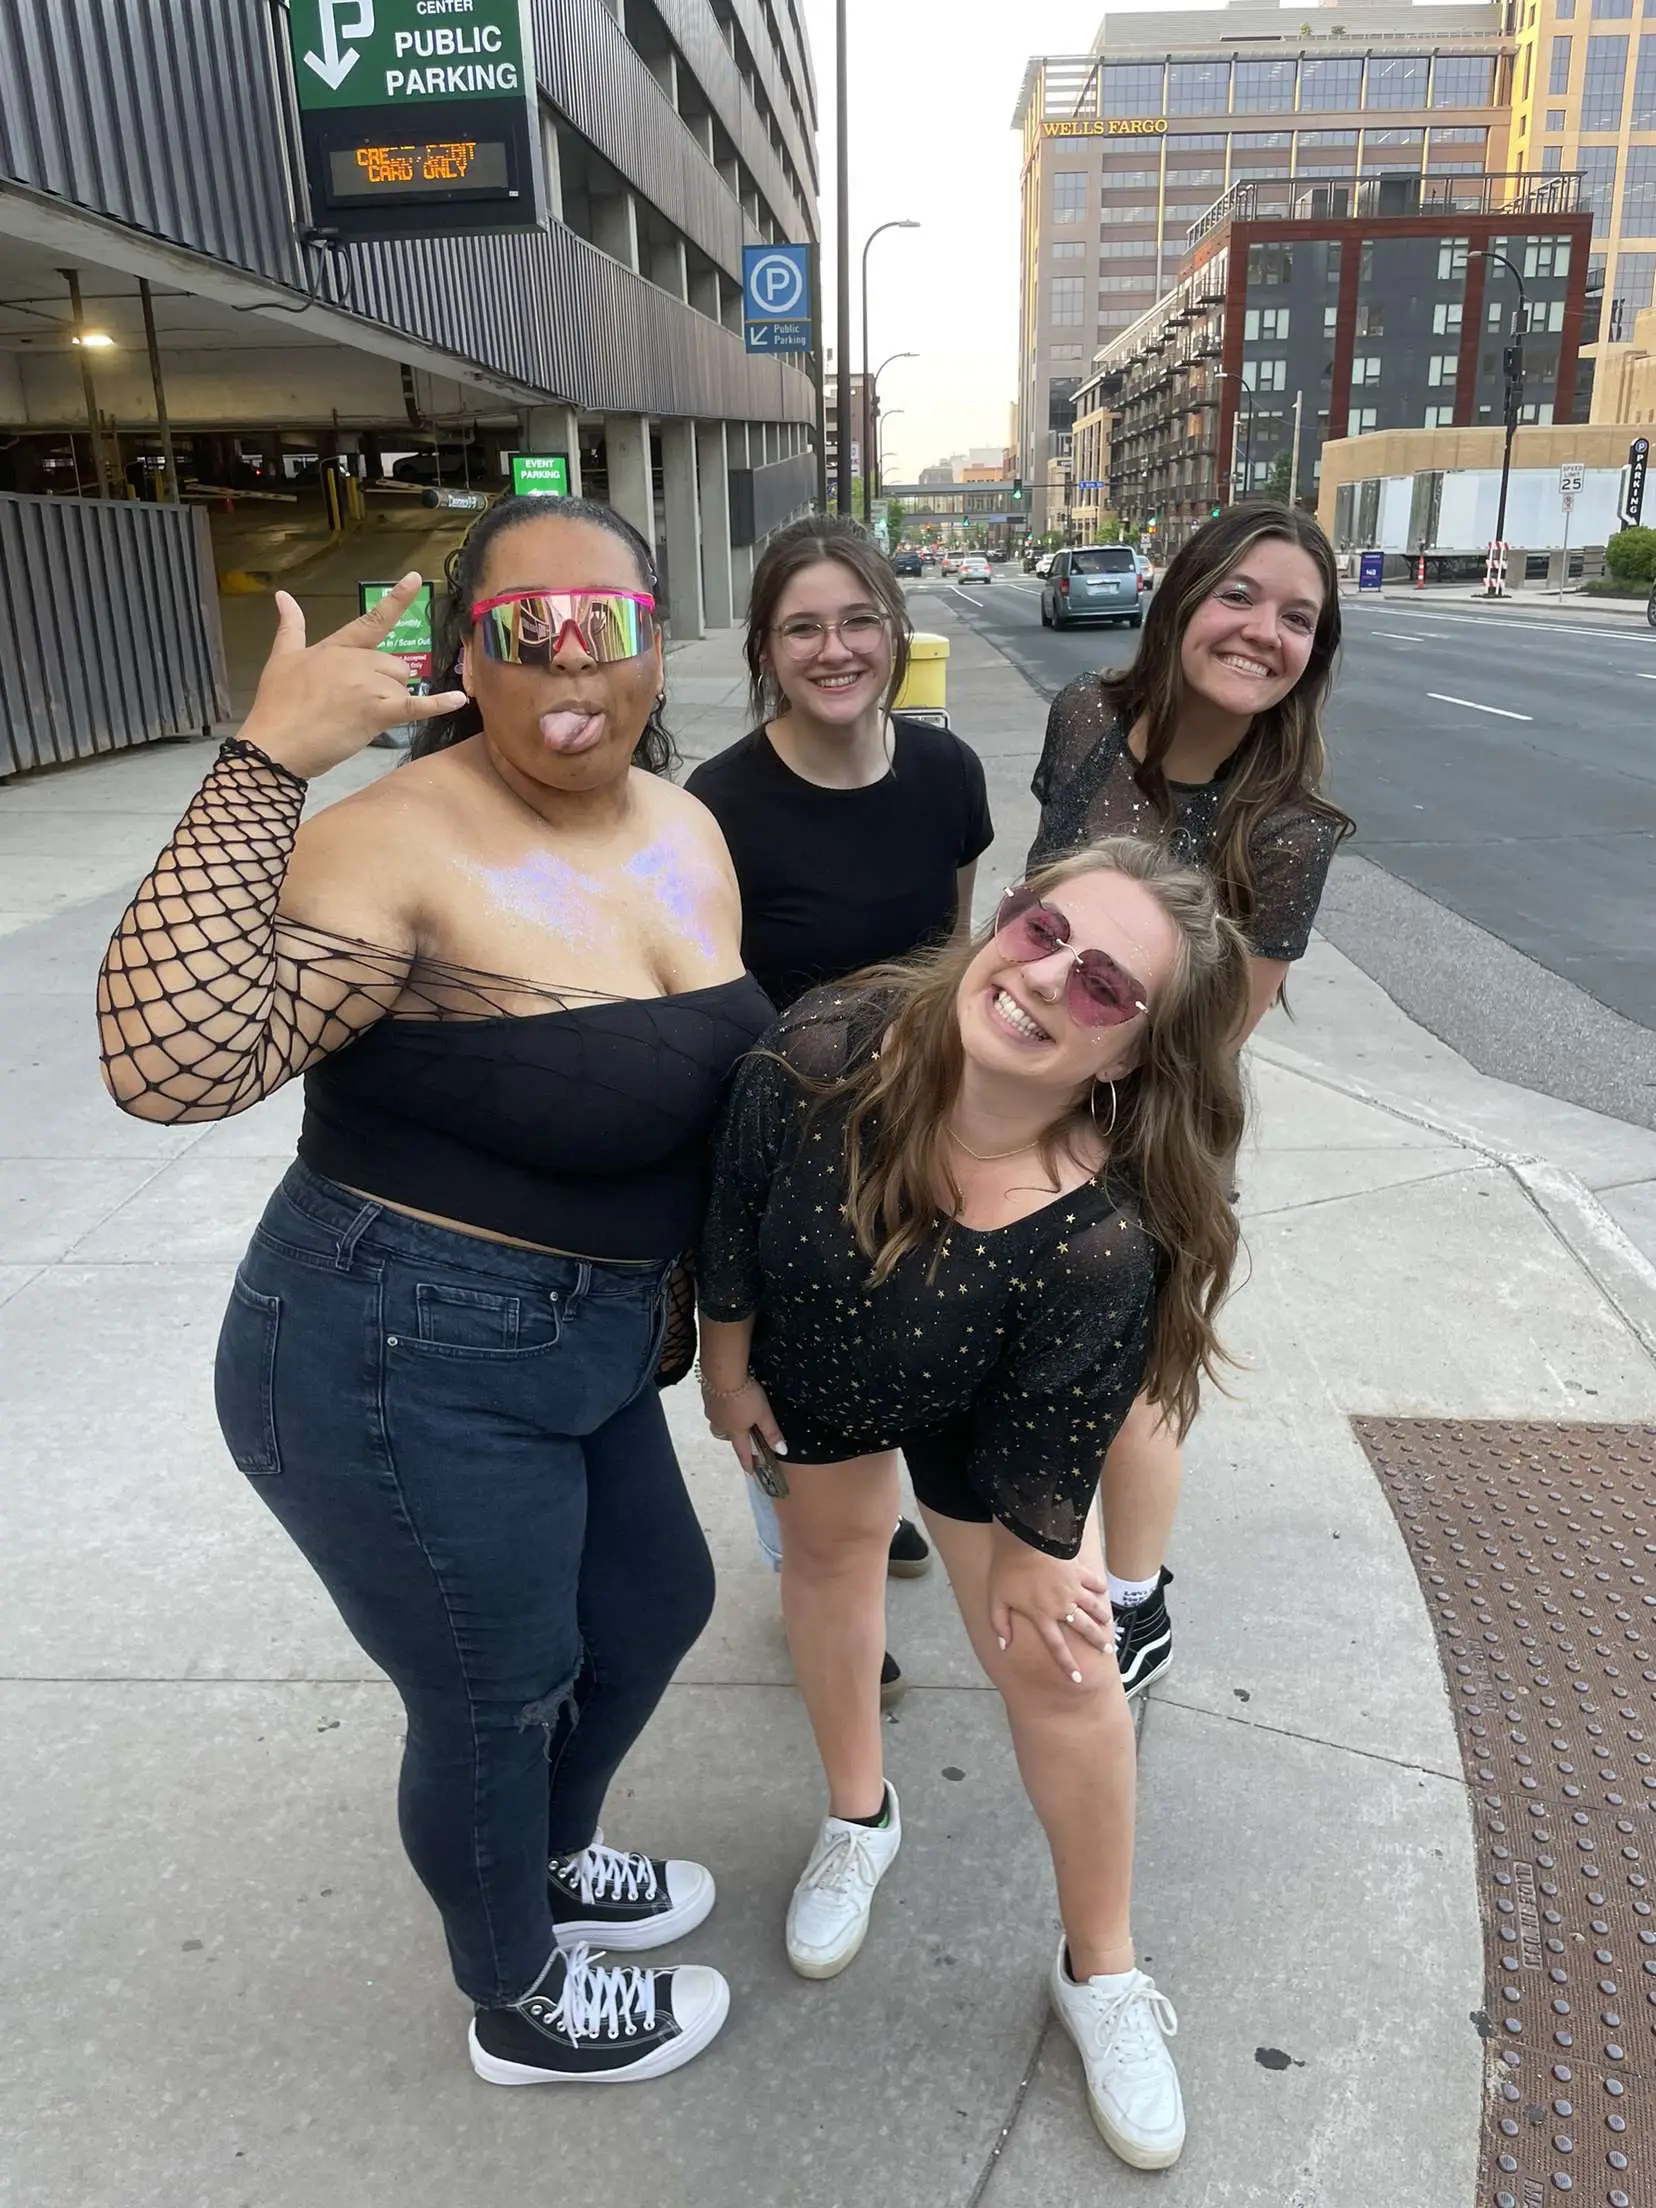  A group of women are standing on a sidewalk with their cars. They are posing for a picture and have their cars parked nearby. The women are wearing shades and jeans